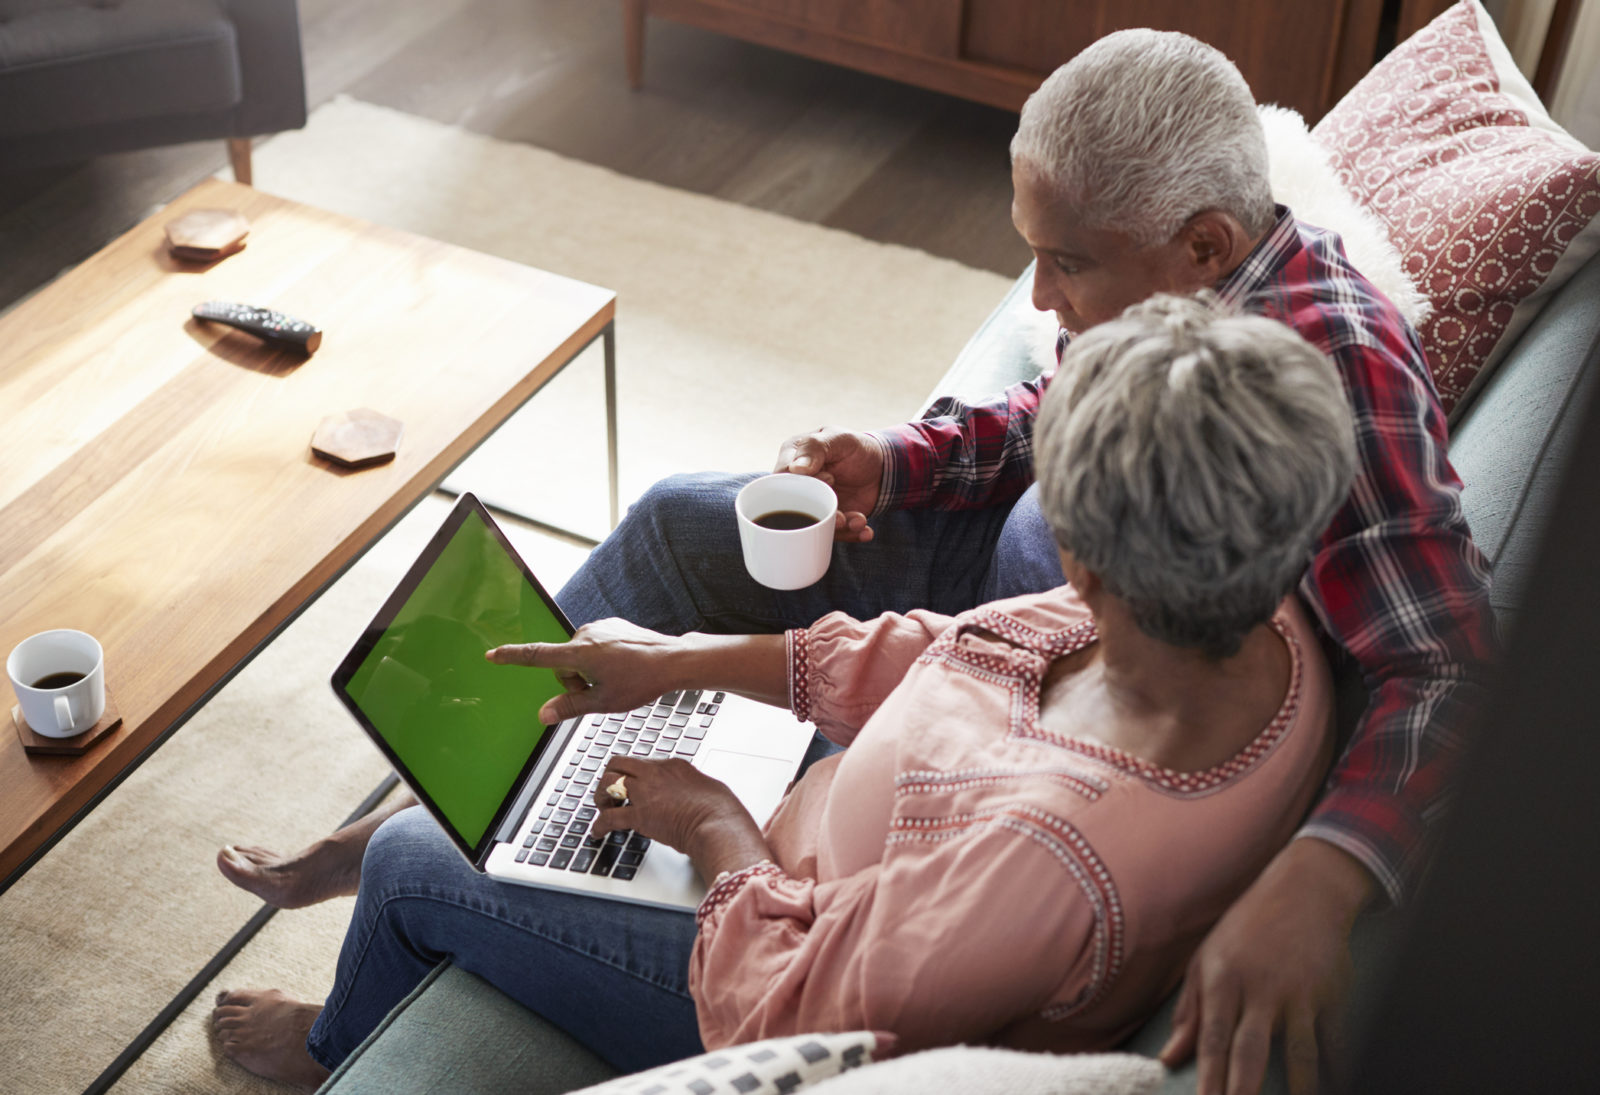 older woman and man sitting on a sofa with an open laptop, having a conversation